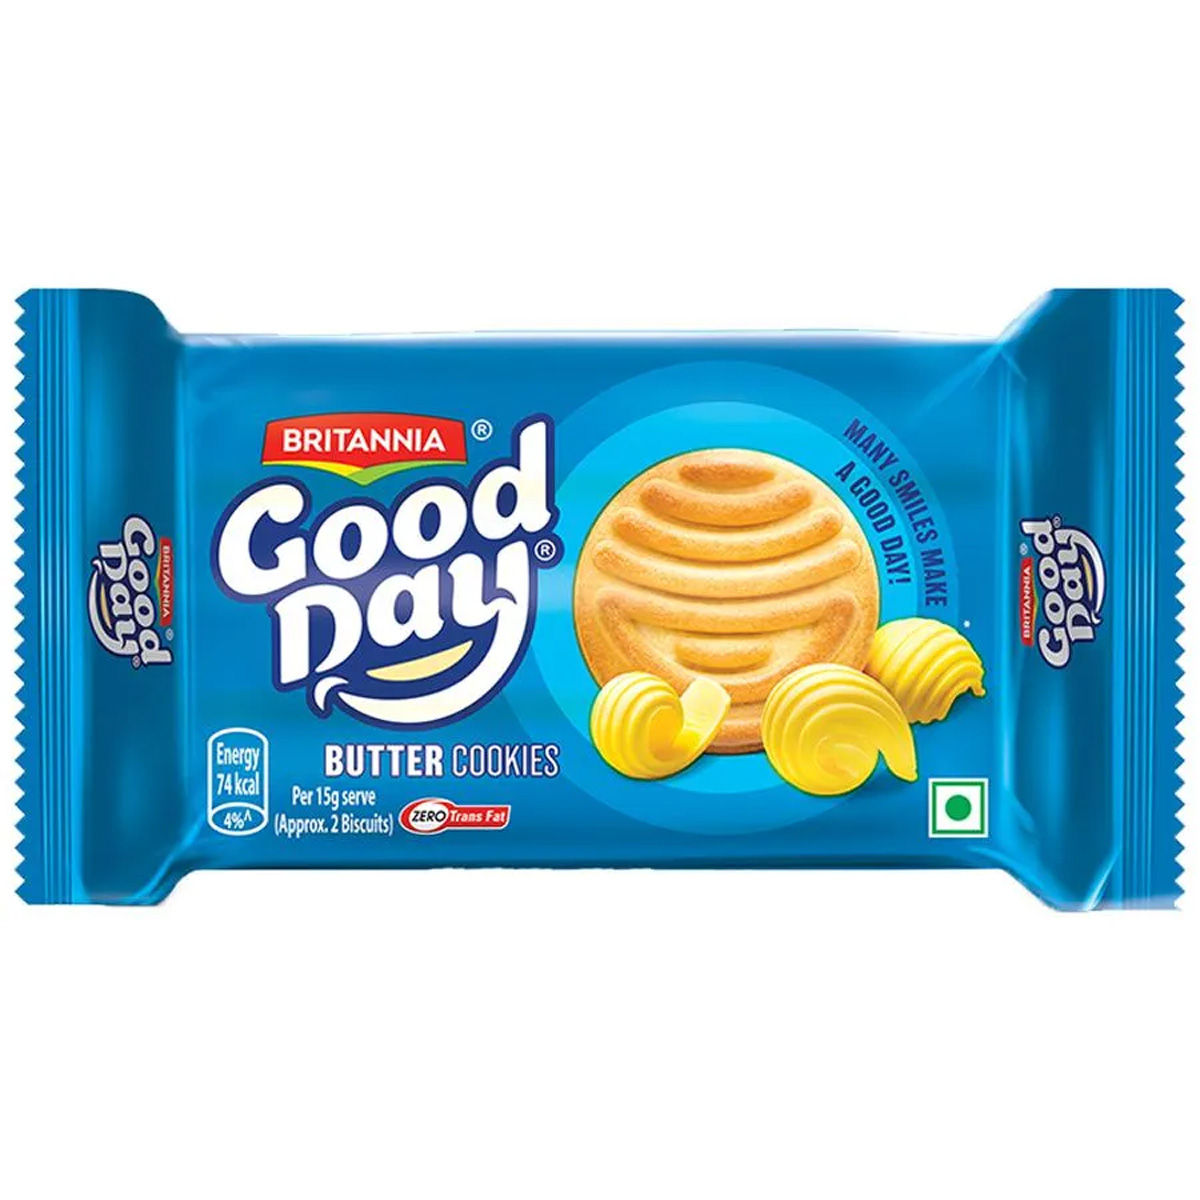 Britannia Good Day Butter Biscuits, 75 gm, Pack of 1 